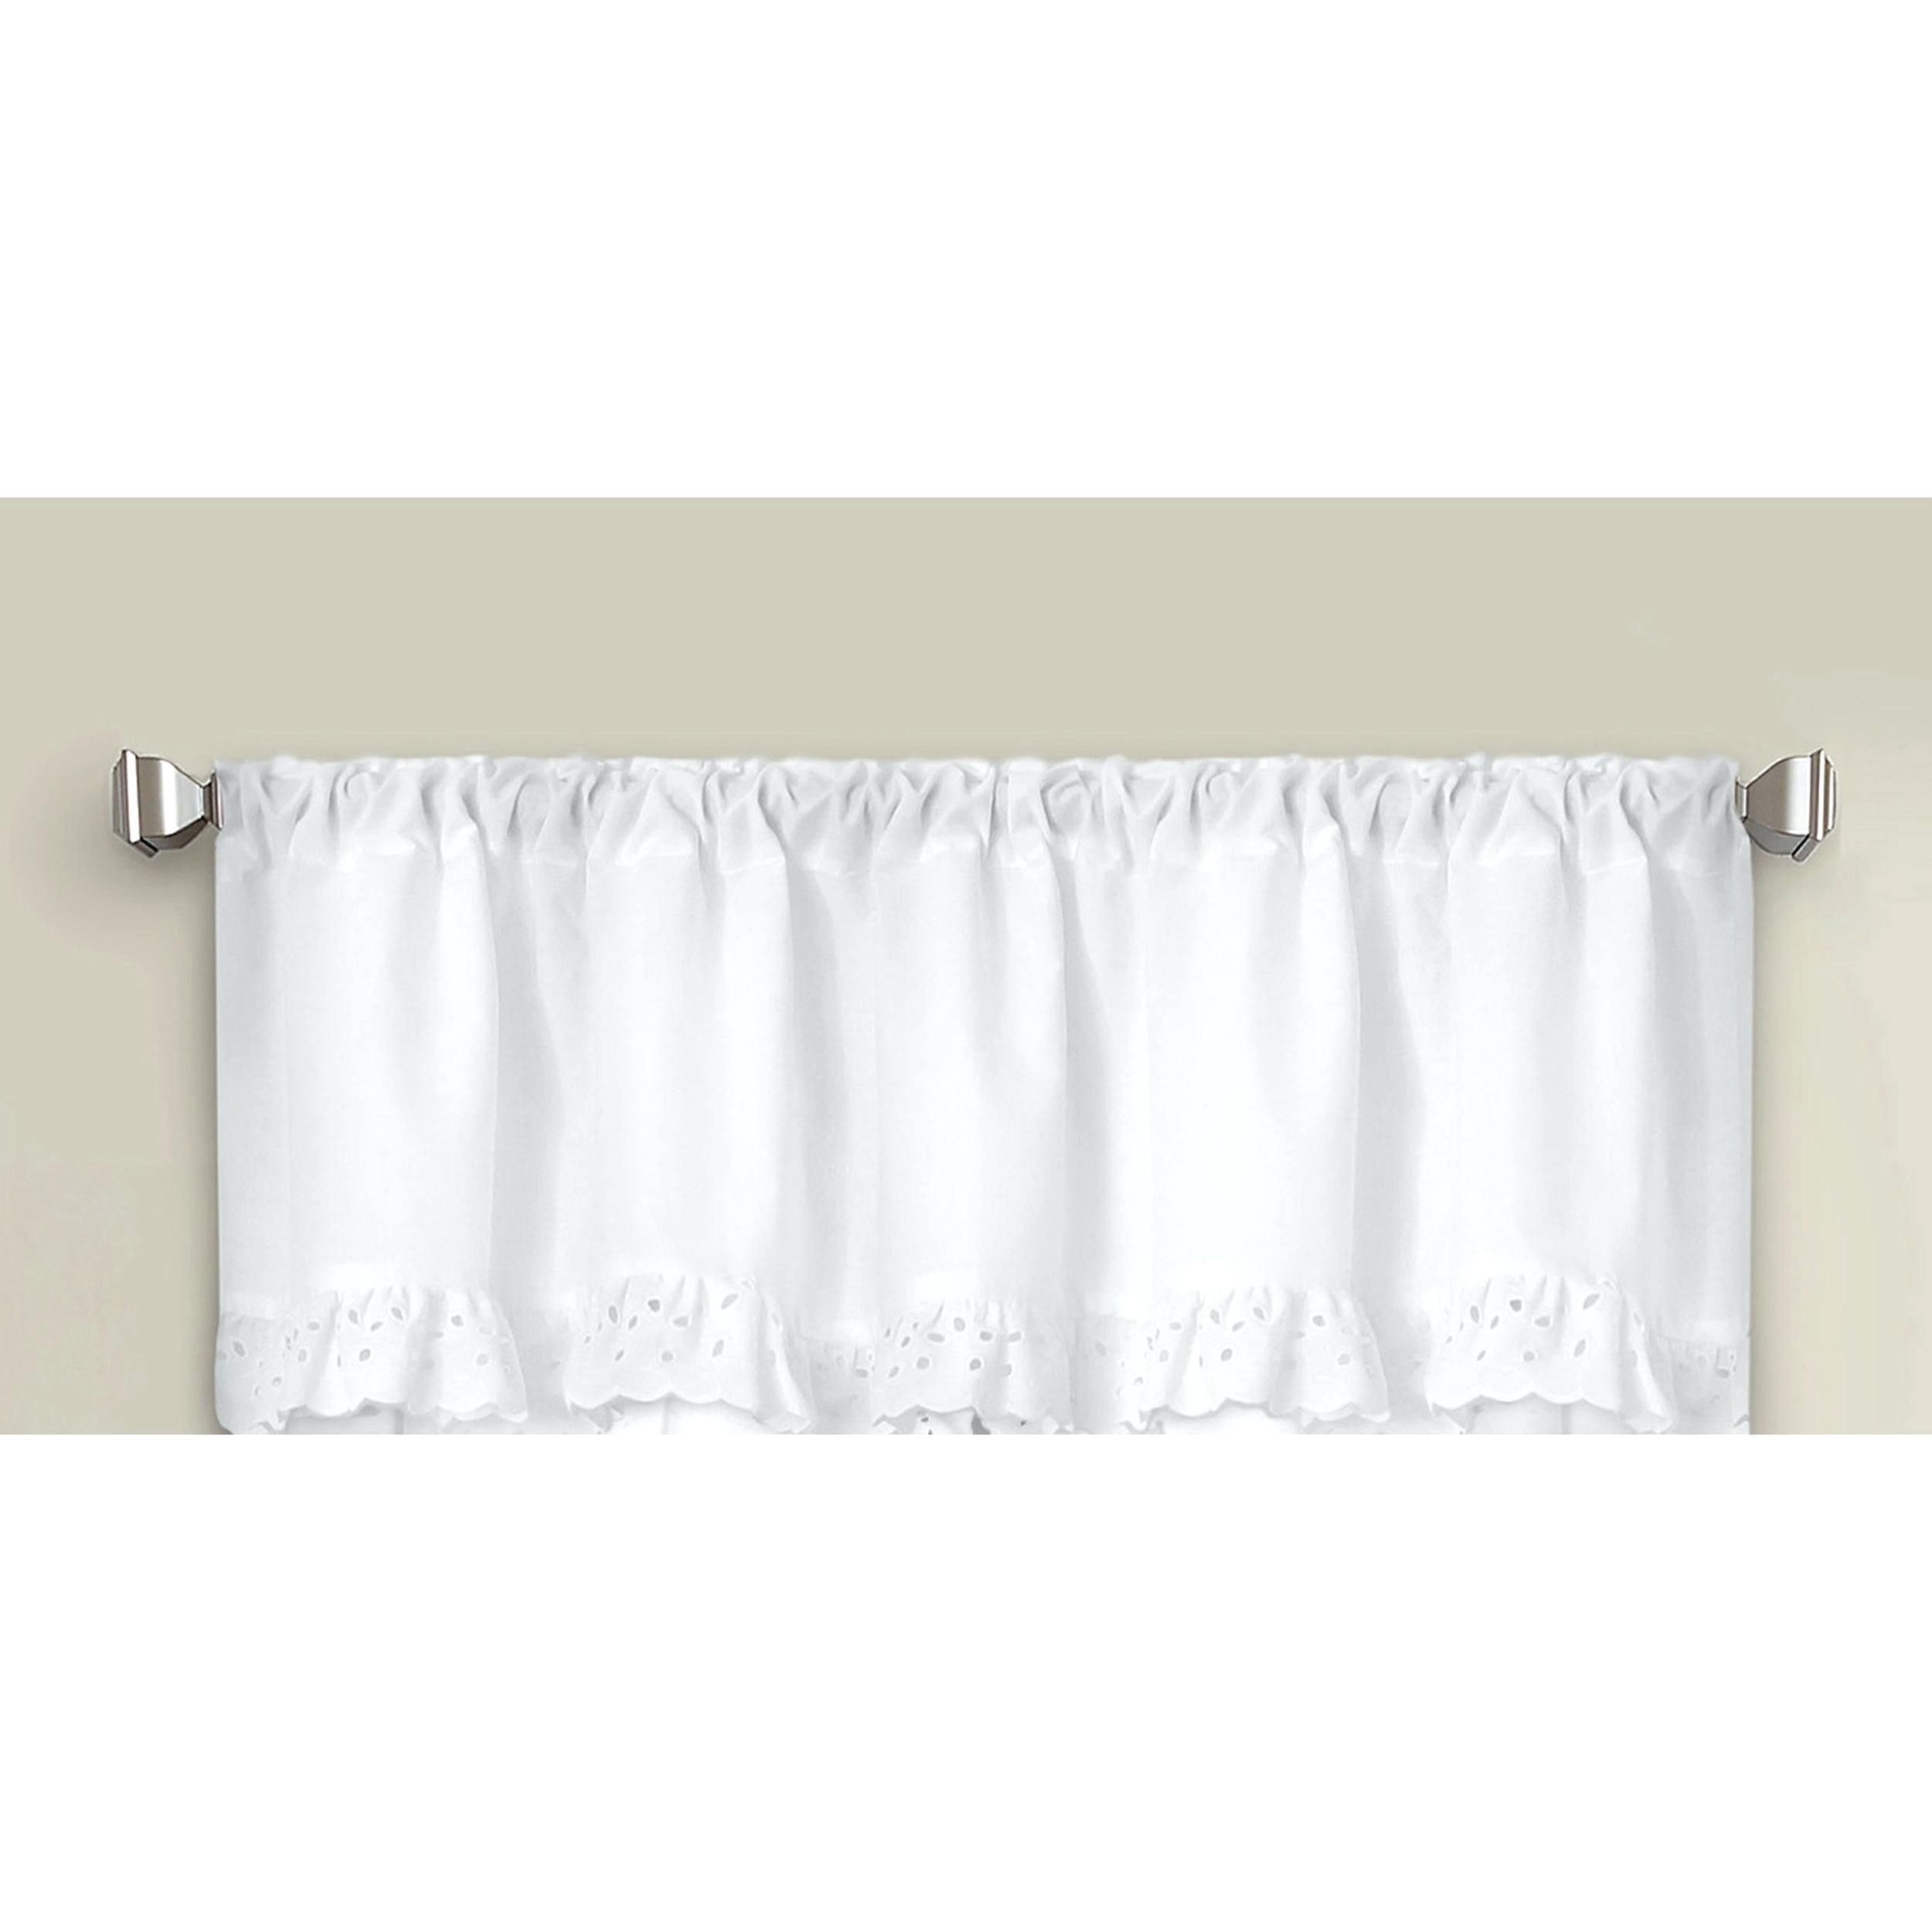 White Ruffled Valance Cape Cod Ruffle Kitchen Curtains Swags Inside White Ruffled Sheer Petticoat Tier Pairs (View 17 of 20)